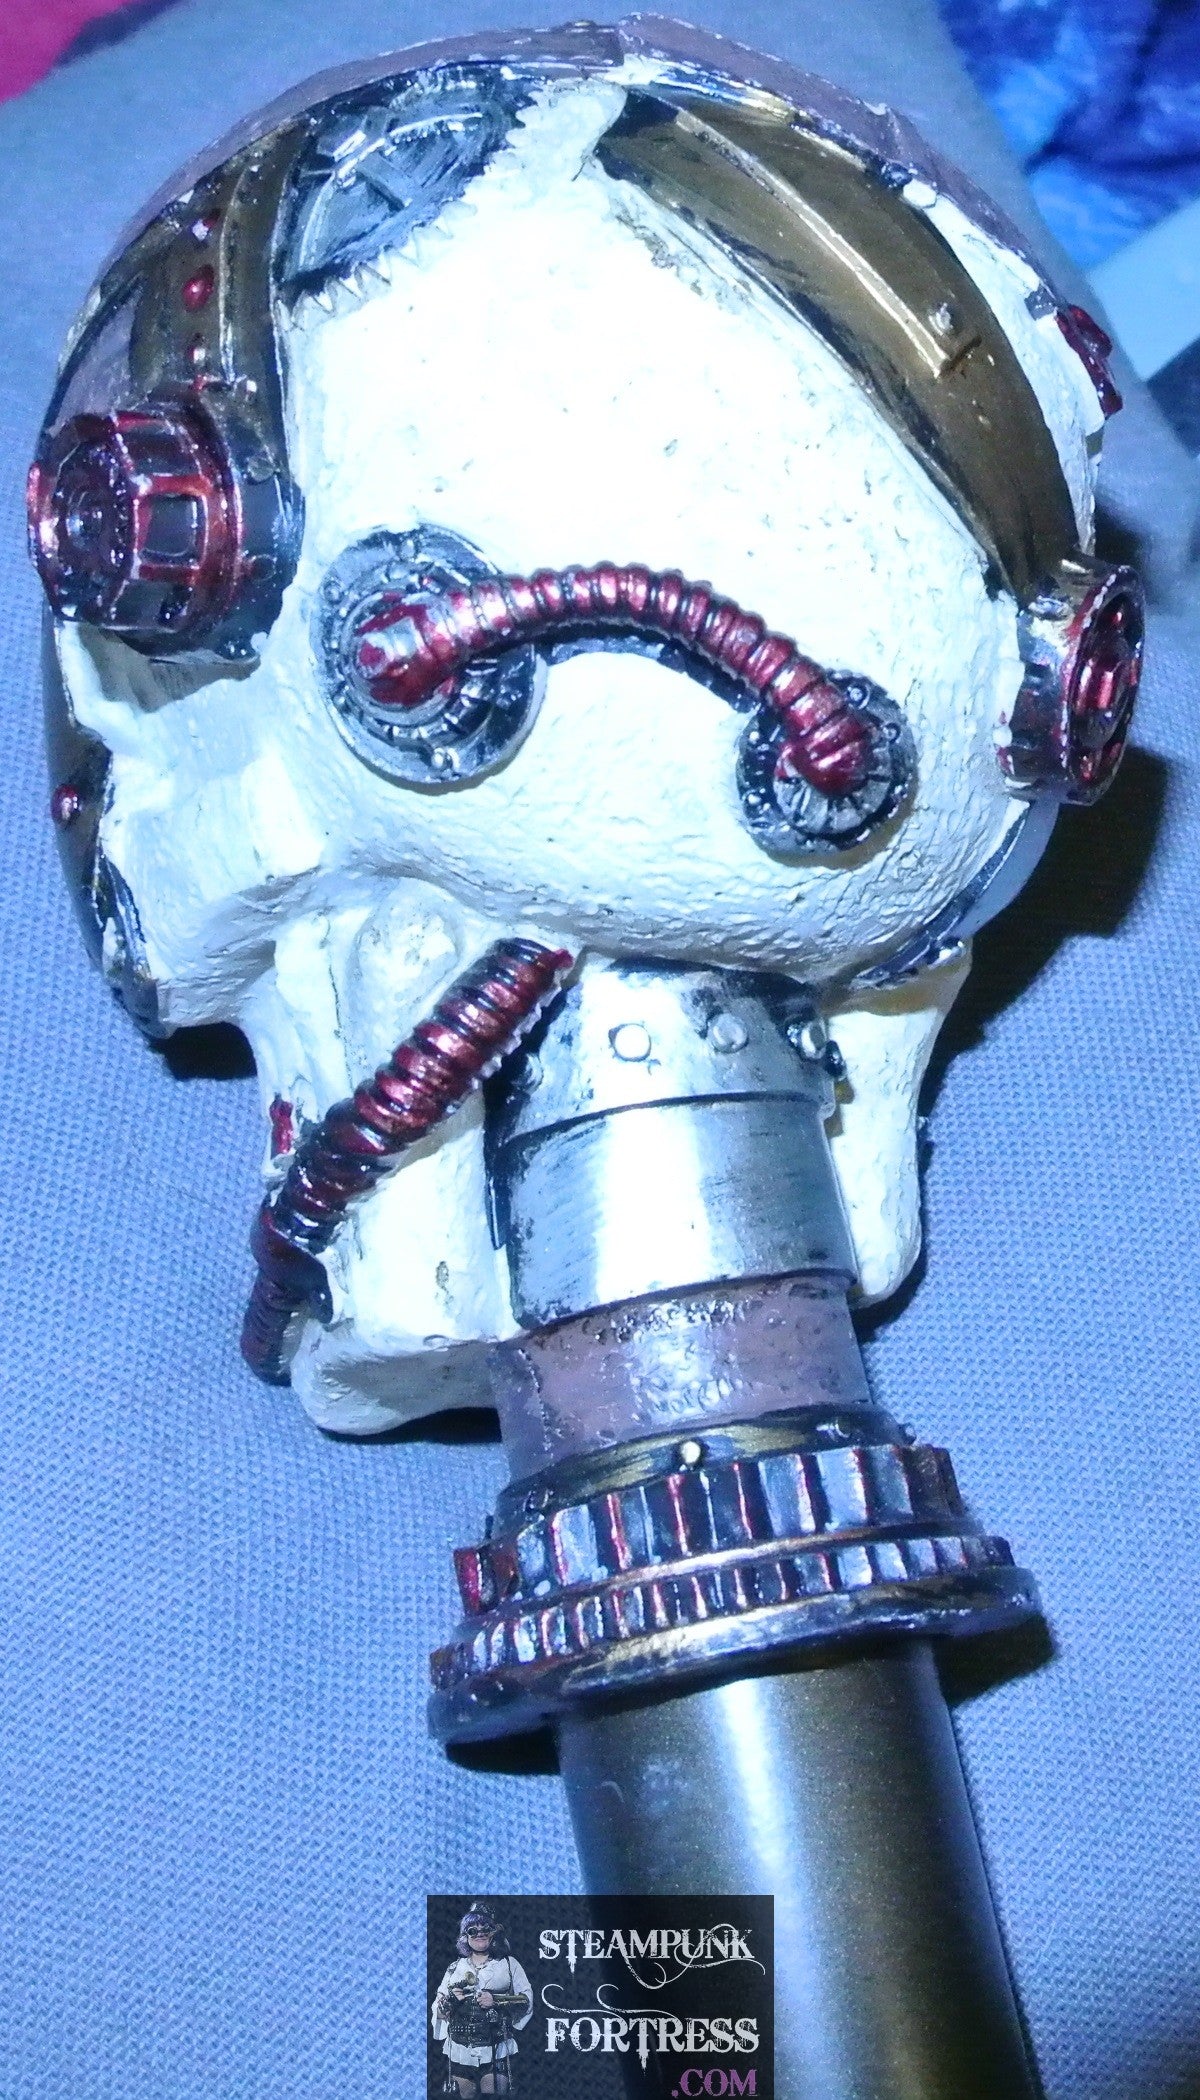 BROWN CERAMIC SKULL MONOCLE SKULL SKELETON STEAMPUNK METAL CANE **DISCONTINUED** MASS PRODUCED